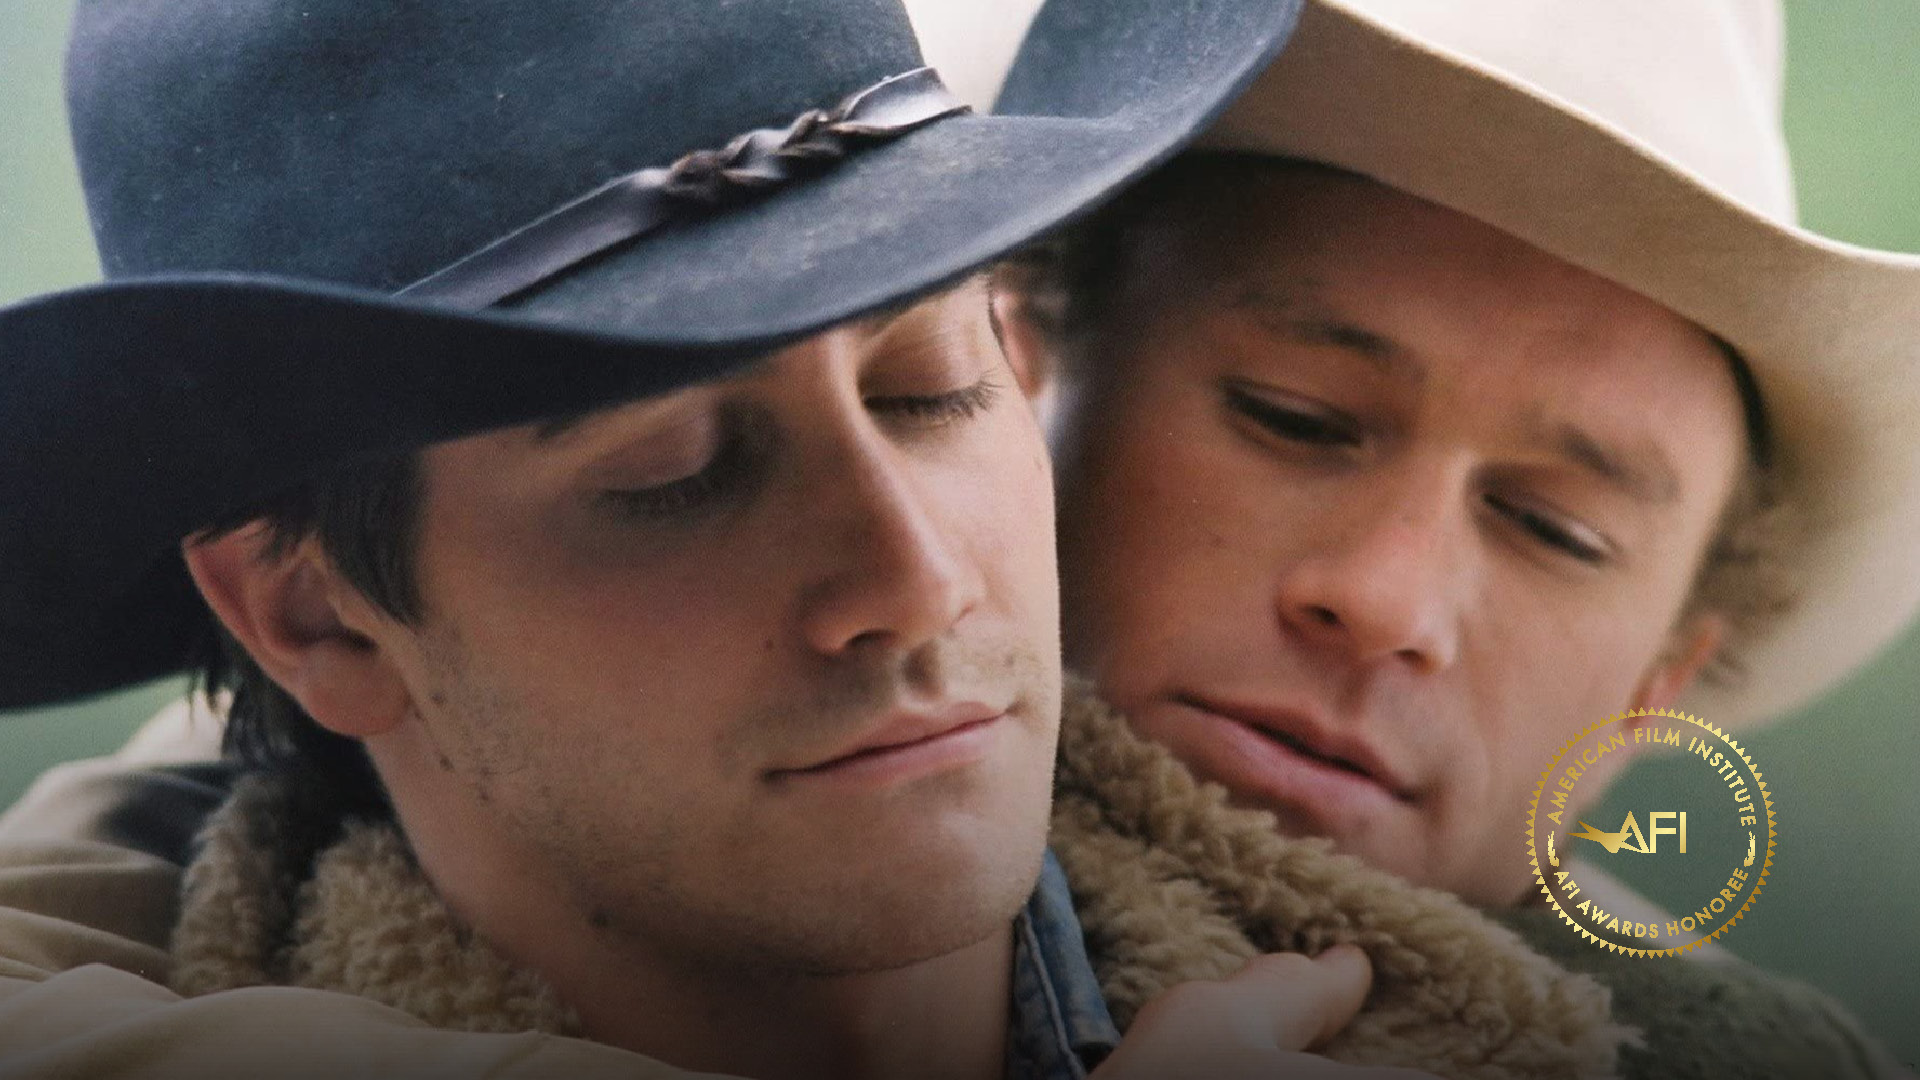 Pride Month Movie Guide - BROKEBACK MOUNTAIN – Ennis Del Mar and Jack Twist - still image from film